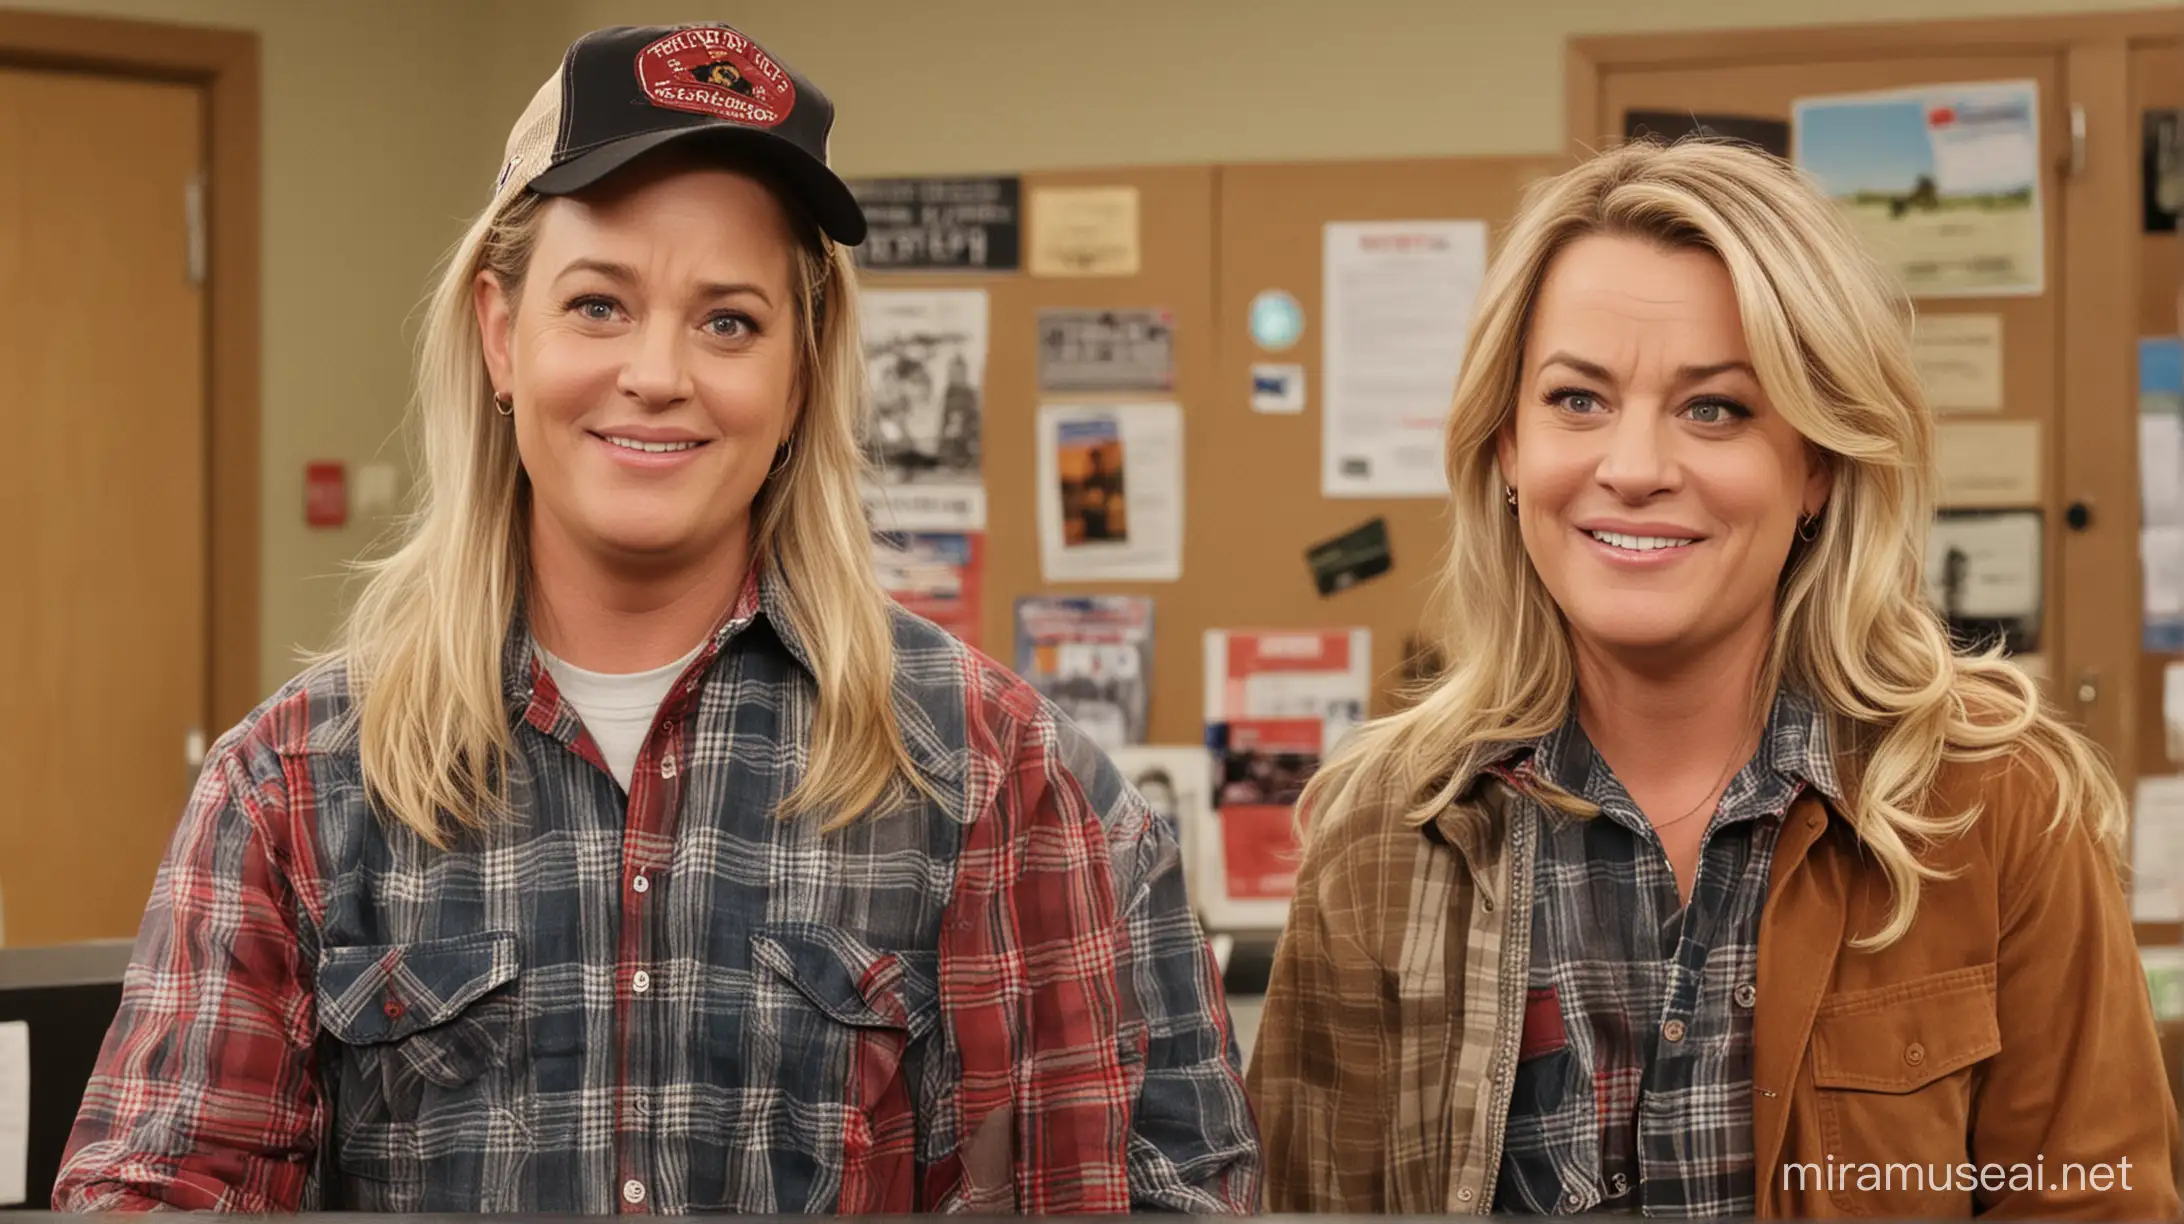 Tom Hanks as a LumberjackInspired Character Joins Parks and Recreation Cast in Office Setting